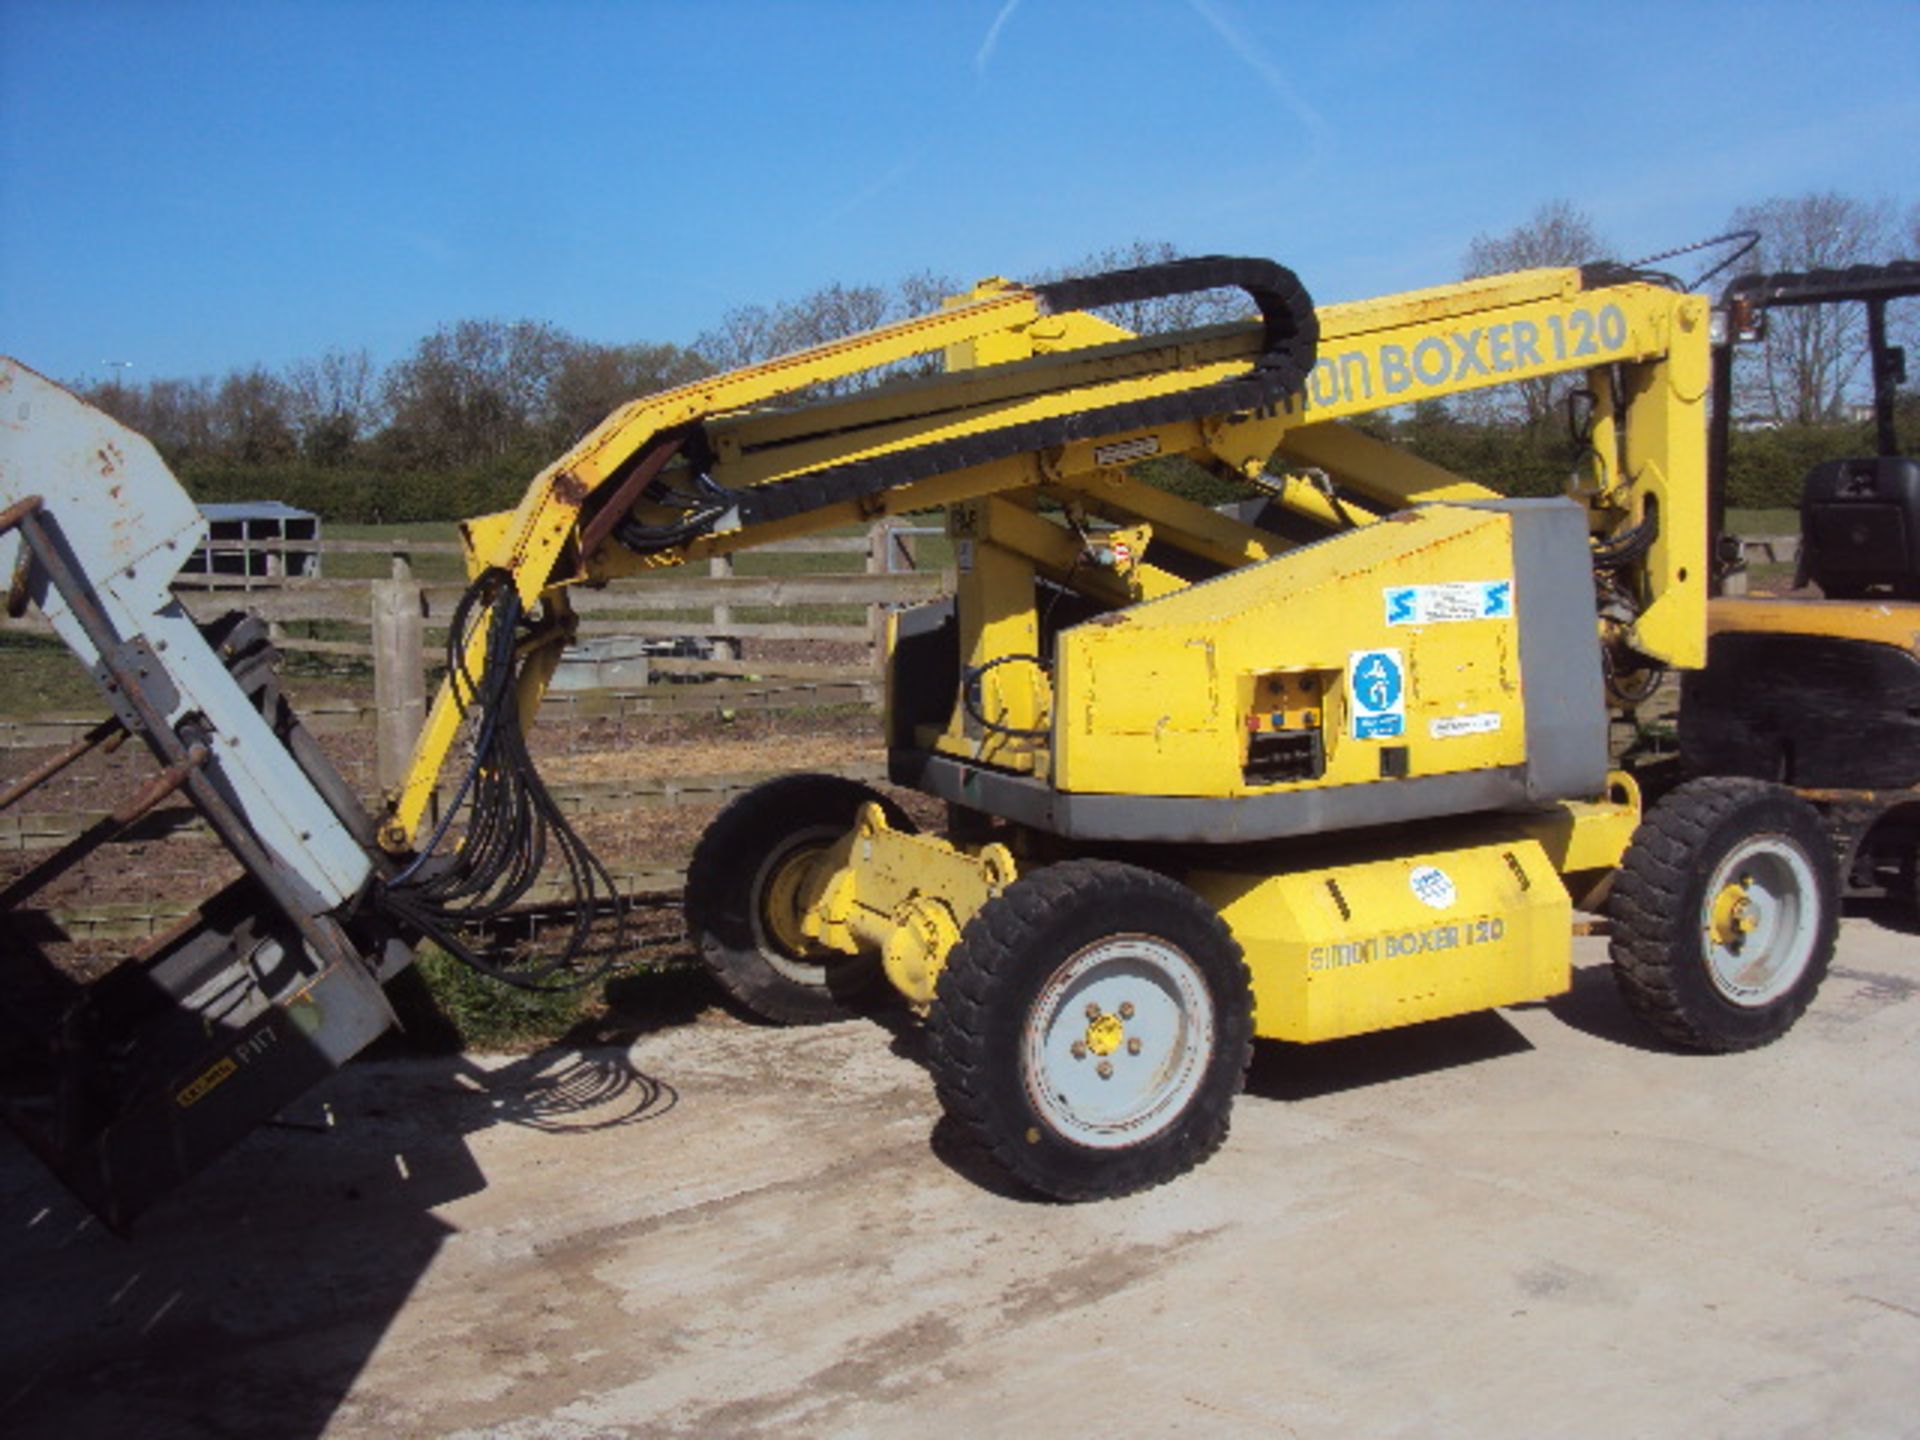 SIMON BOXER 120 battery driven articulated boom lift (RDL) (This item is located at Risley Lane, - Image 2 of 3